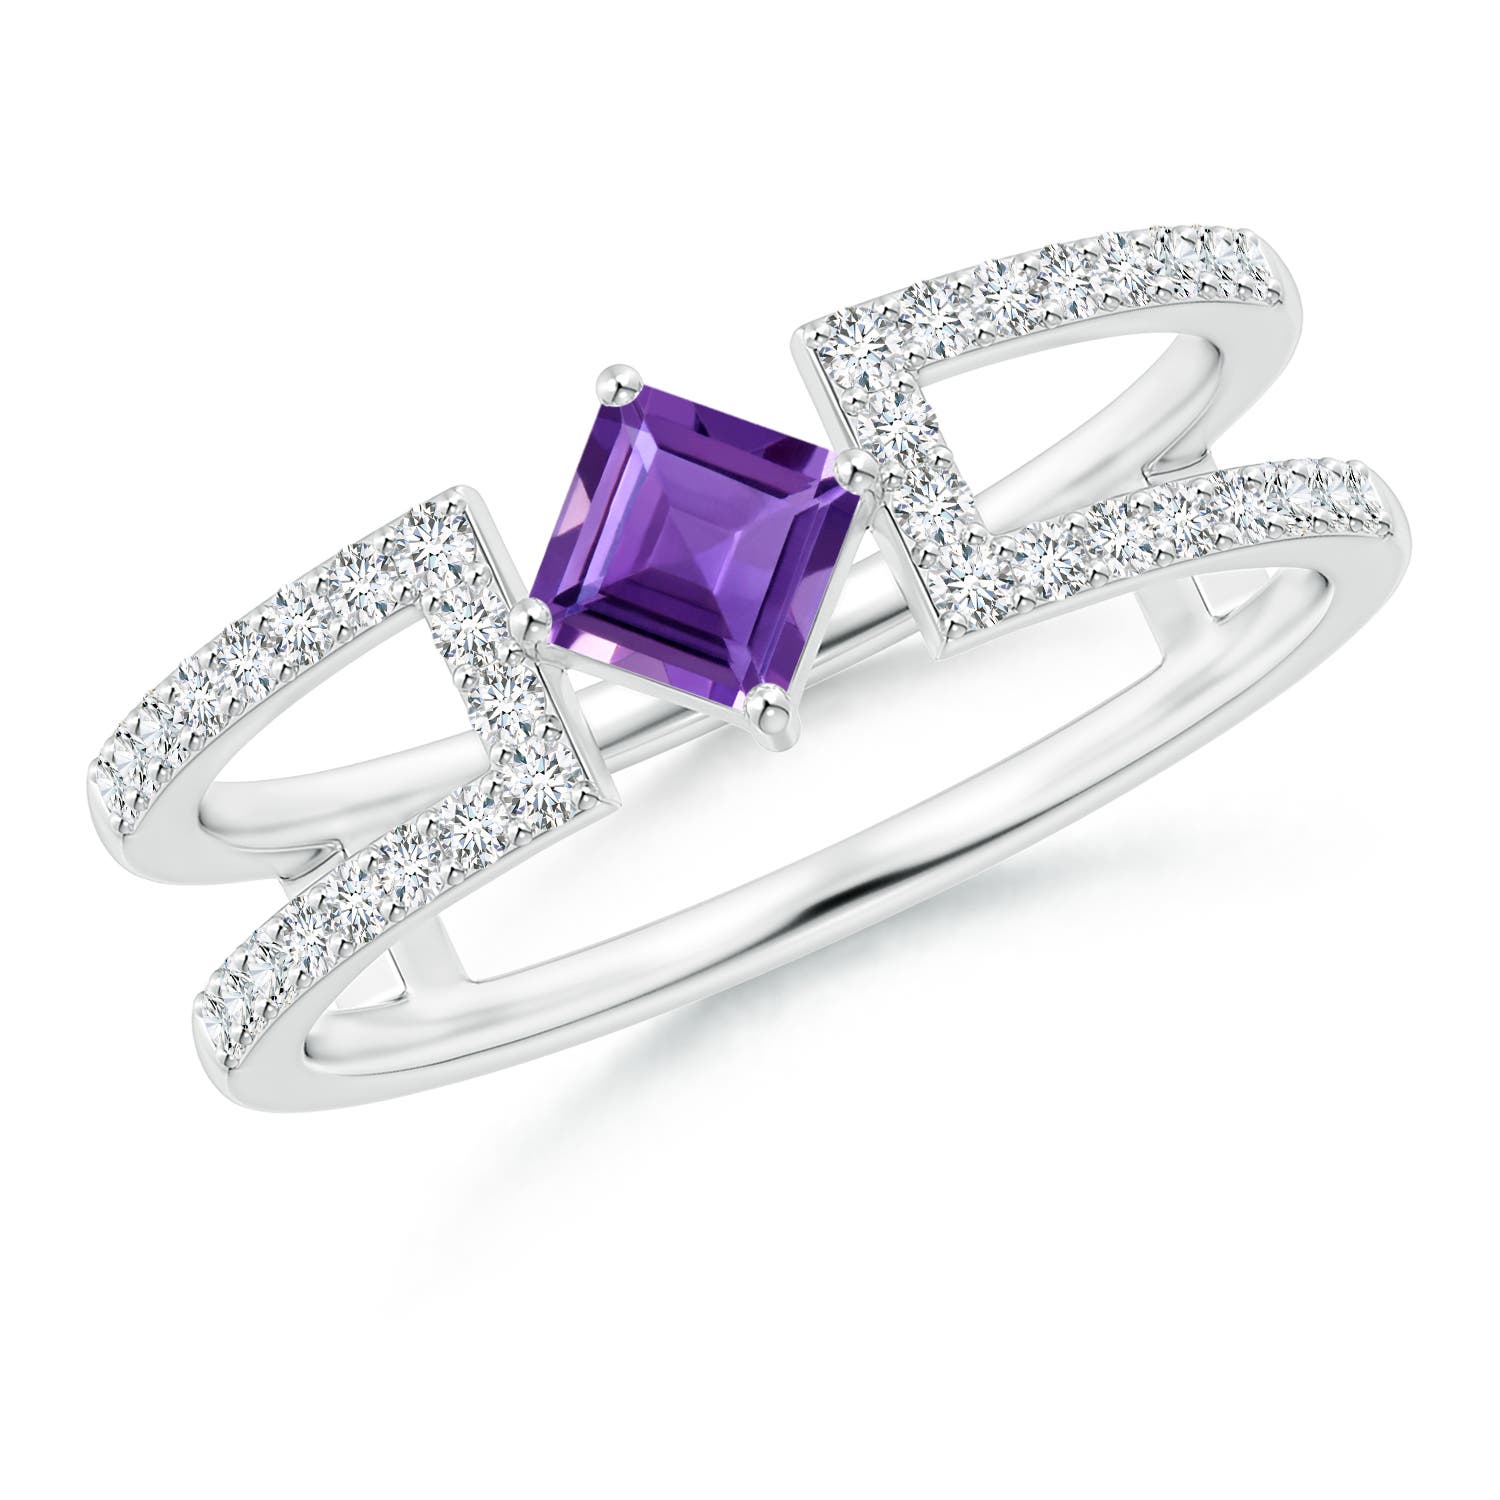 AAA - Amethyst / 0.58 CT / 14 KT White Gold